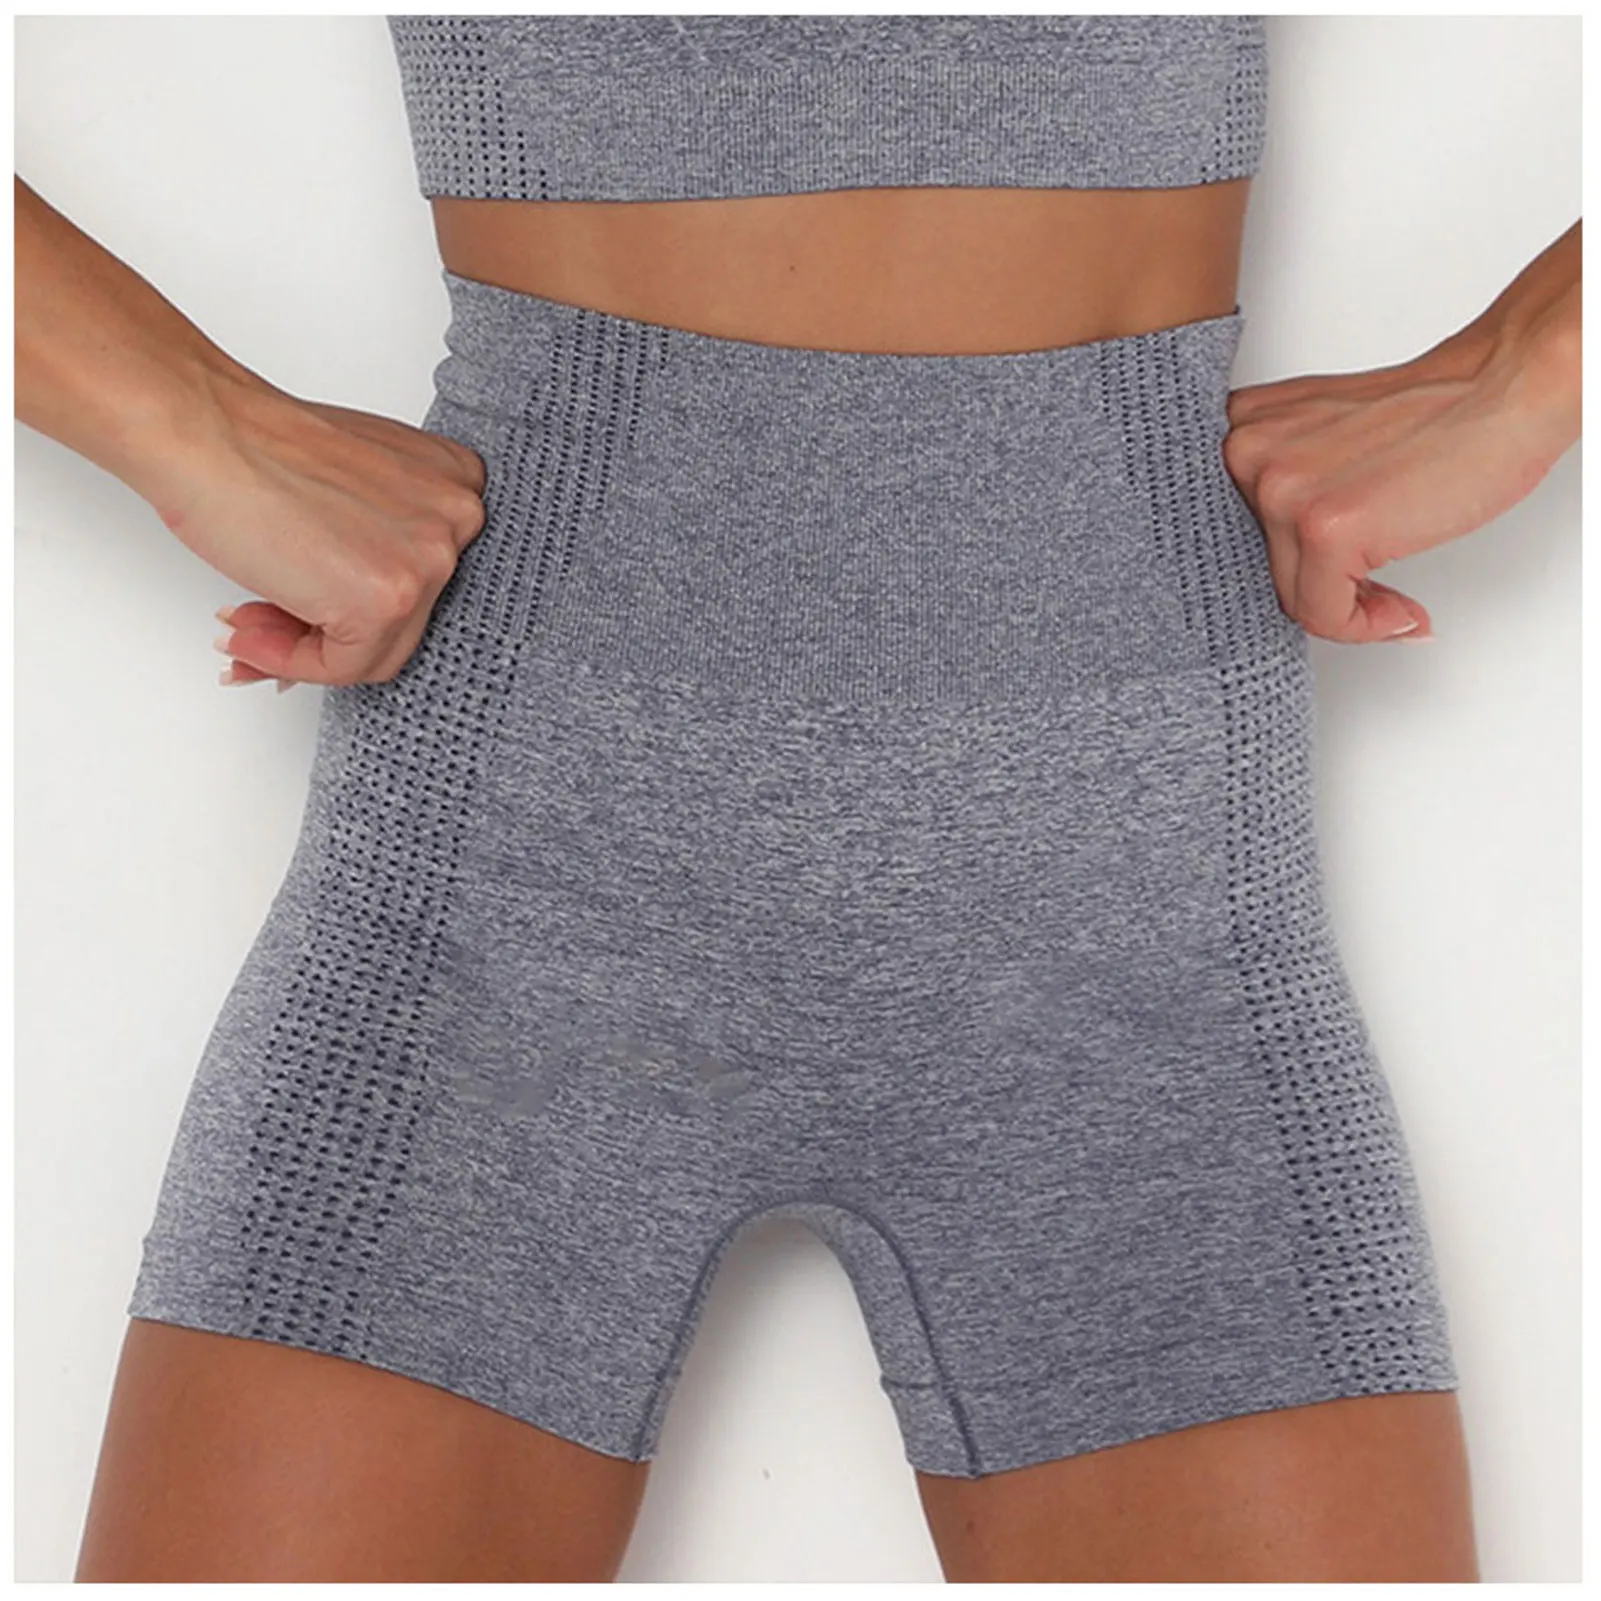 

2/3 Woman’s Running Yoga Outfit Set with High Waisted Textured Scrunch Butt Hot Shorts for Fitness Enthusiasts Gifts